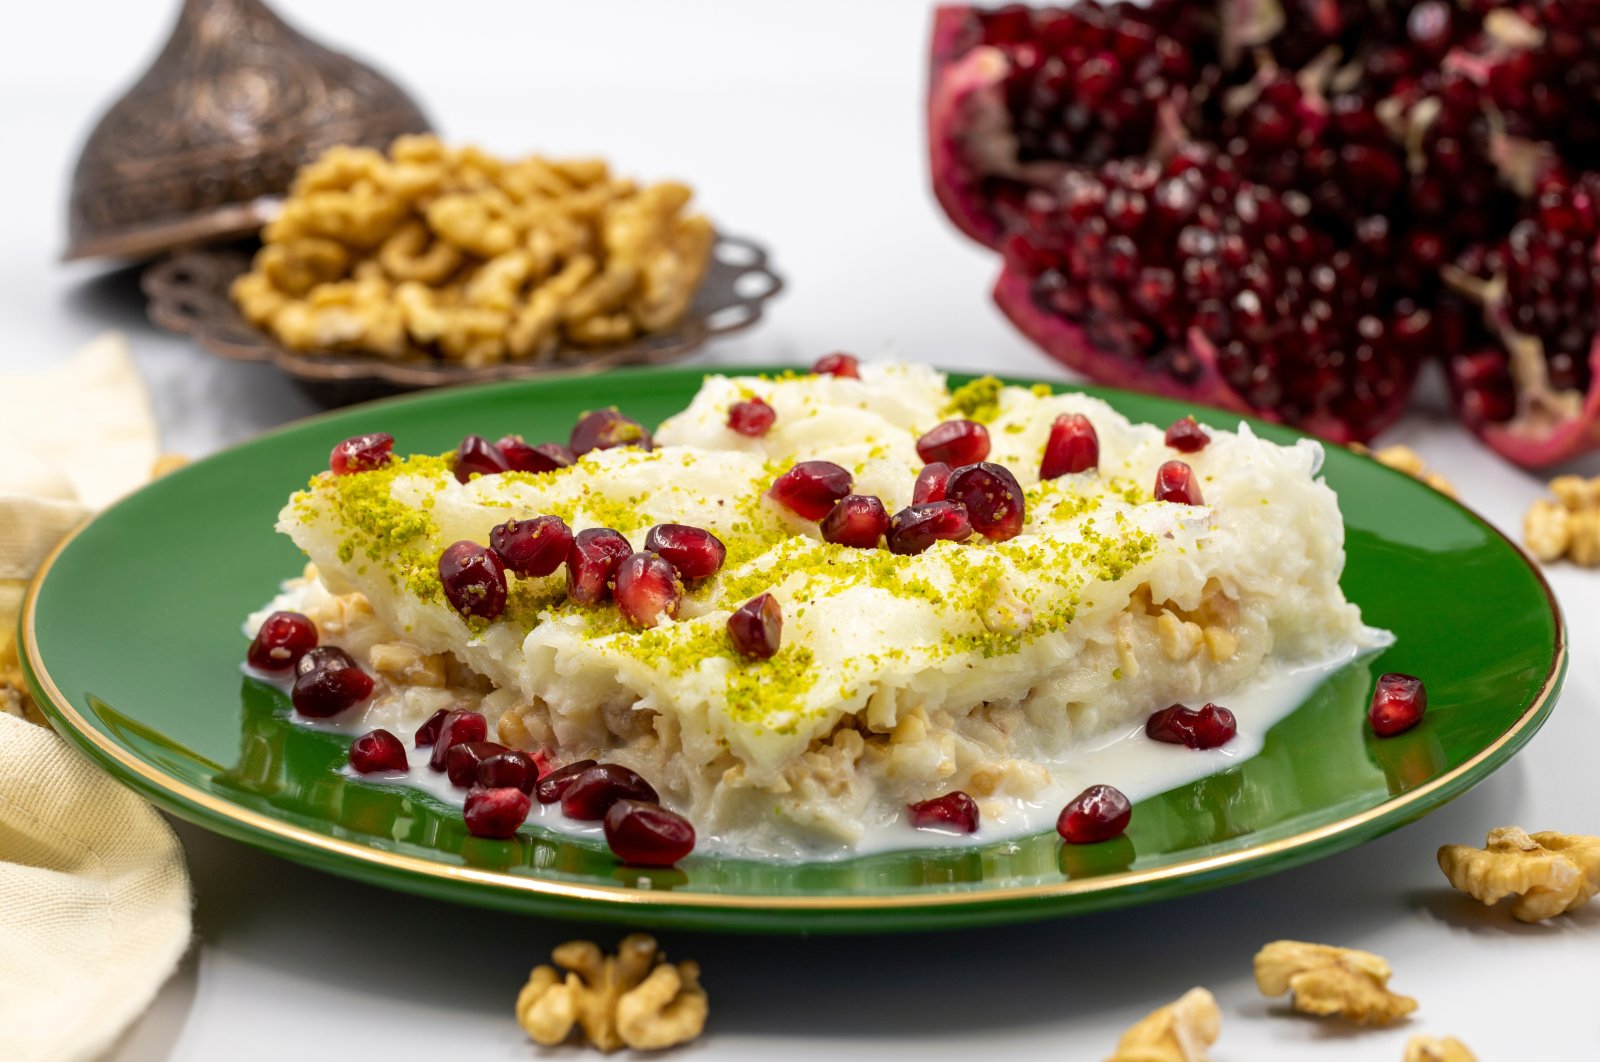 Very popular during Ramadan, Güllaç is a traditional chilled Turkish dessert made with delicate sheets of pastry. (Shutterstock Photo)